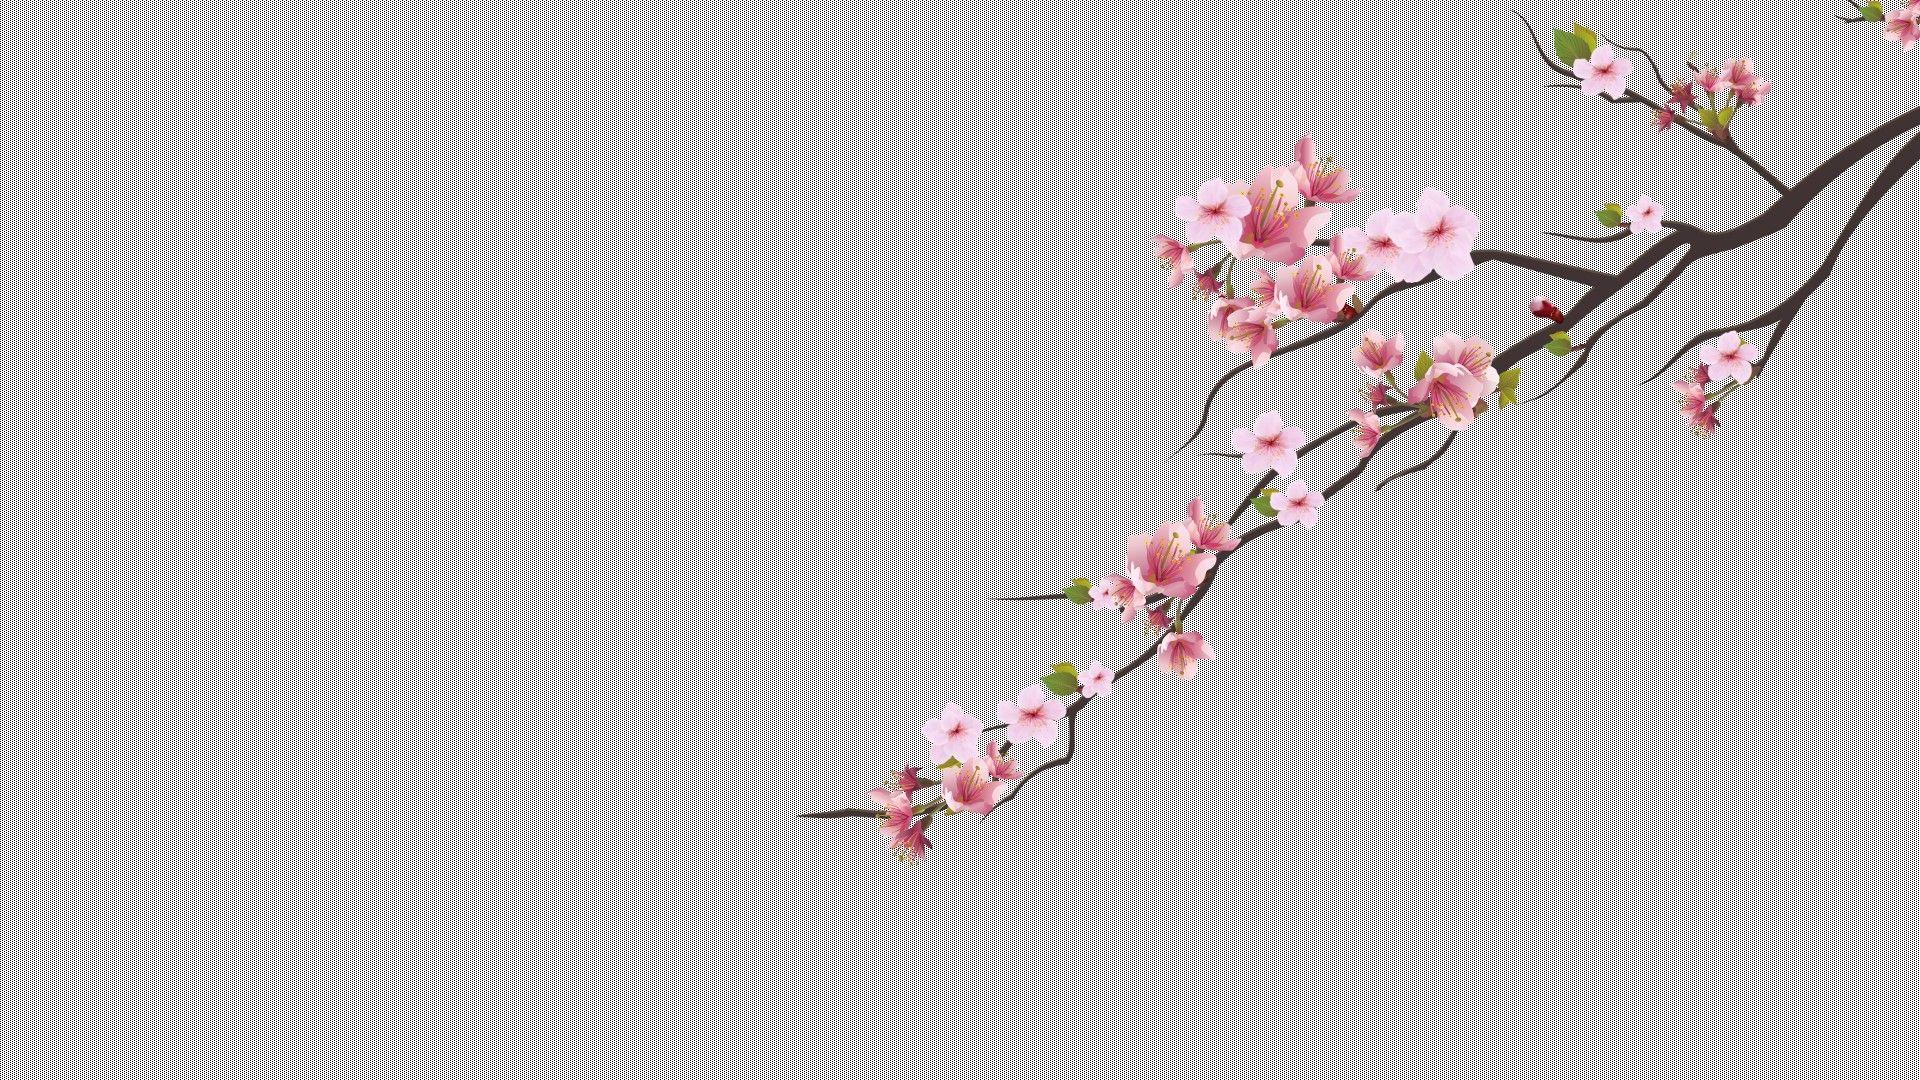 15 Top minimalist flower desktop wallpaper You Can Use It For Free ...